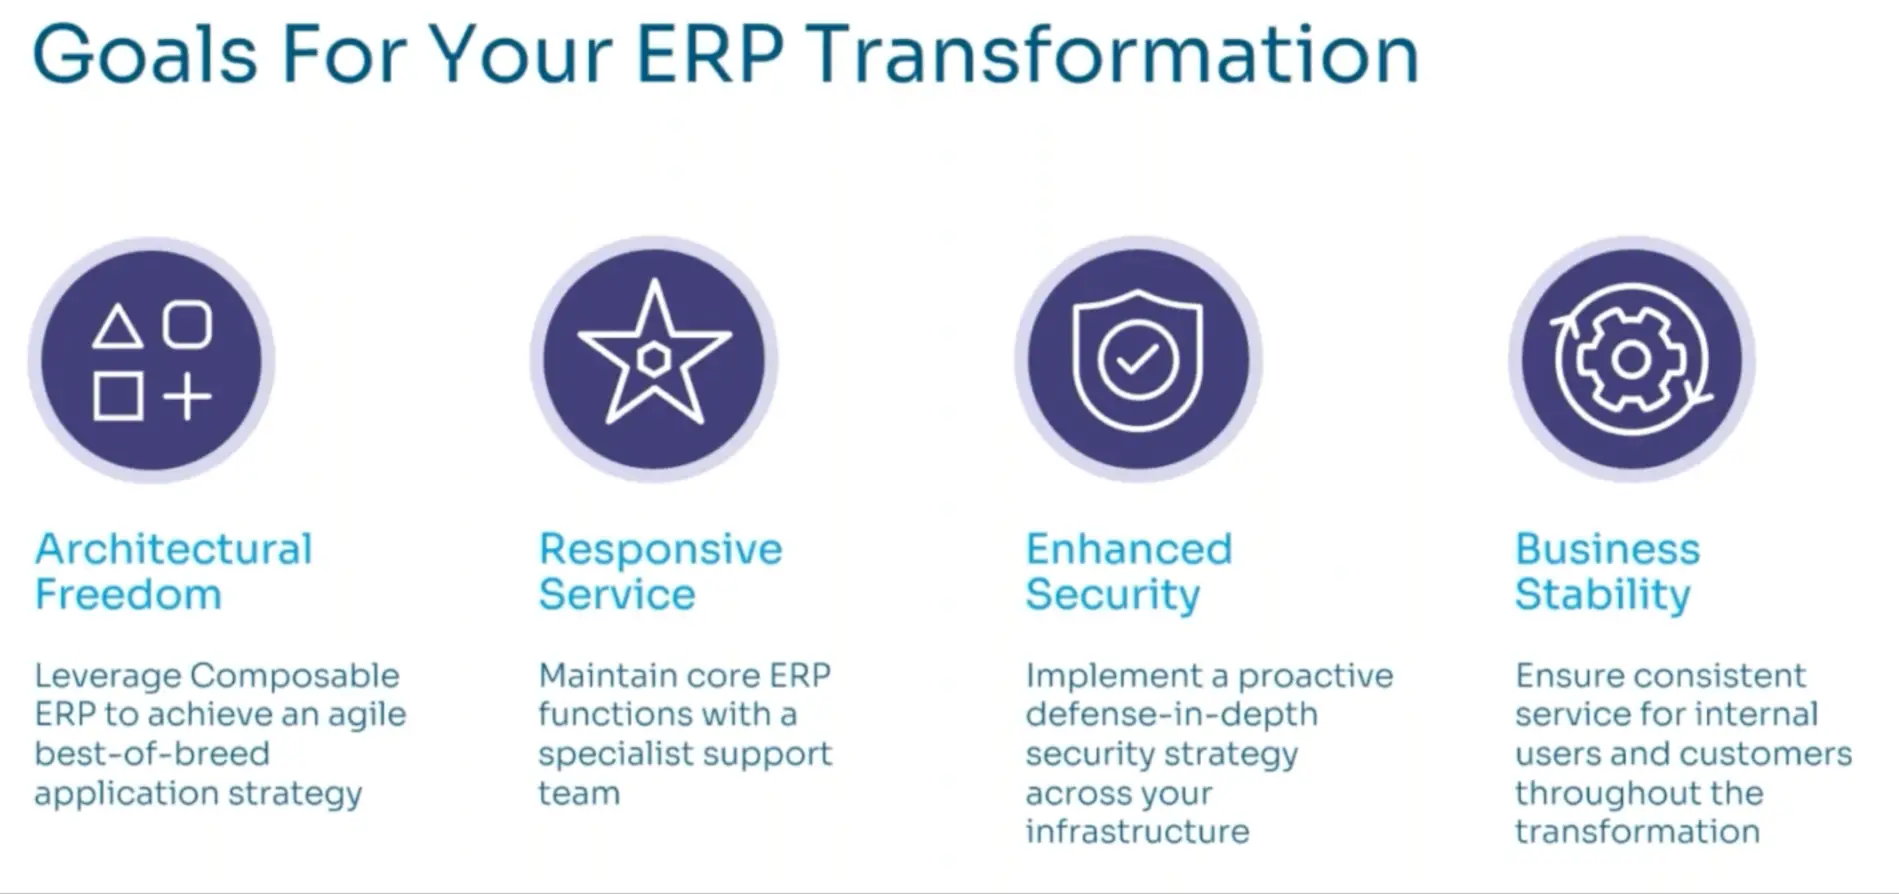 What do you want to achieve from your ERP transformation